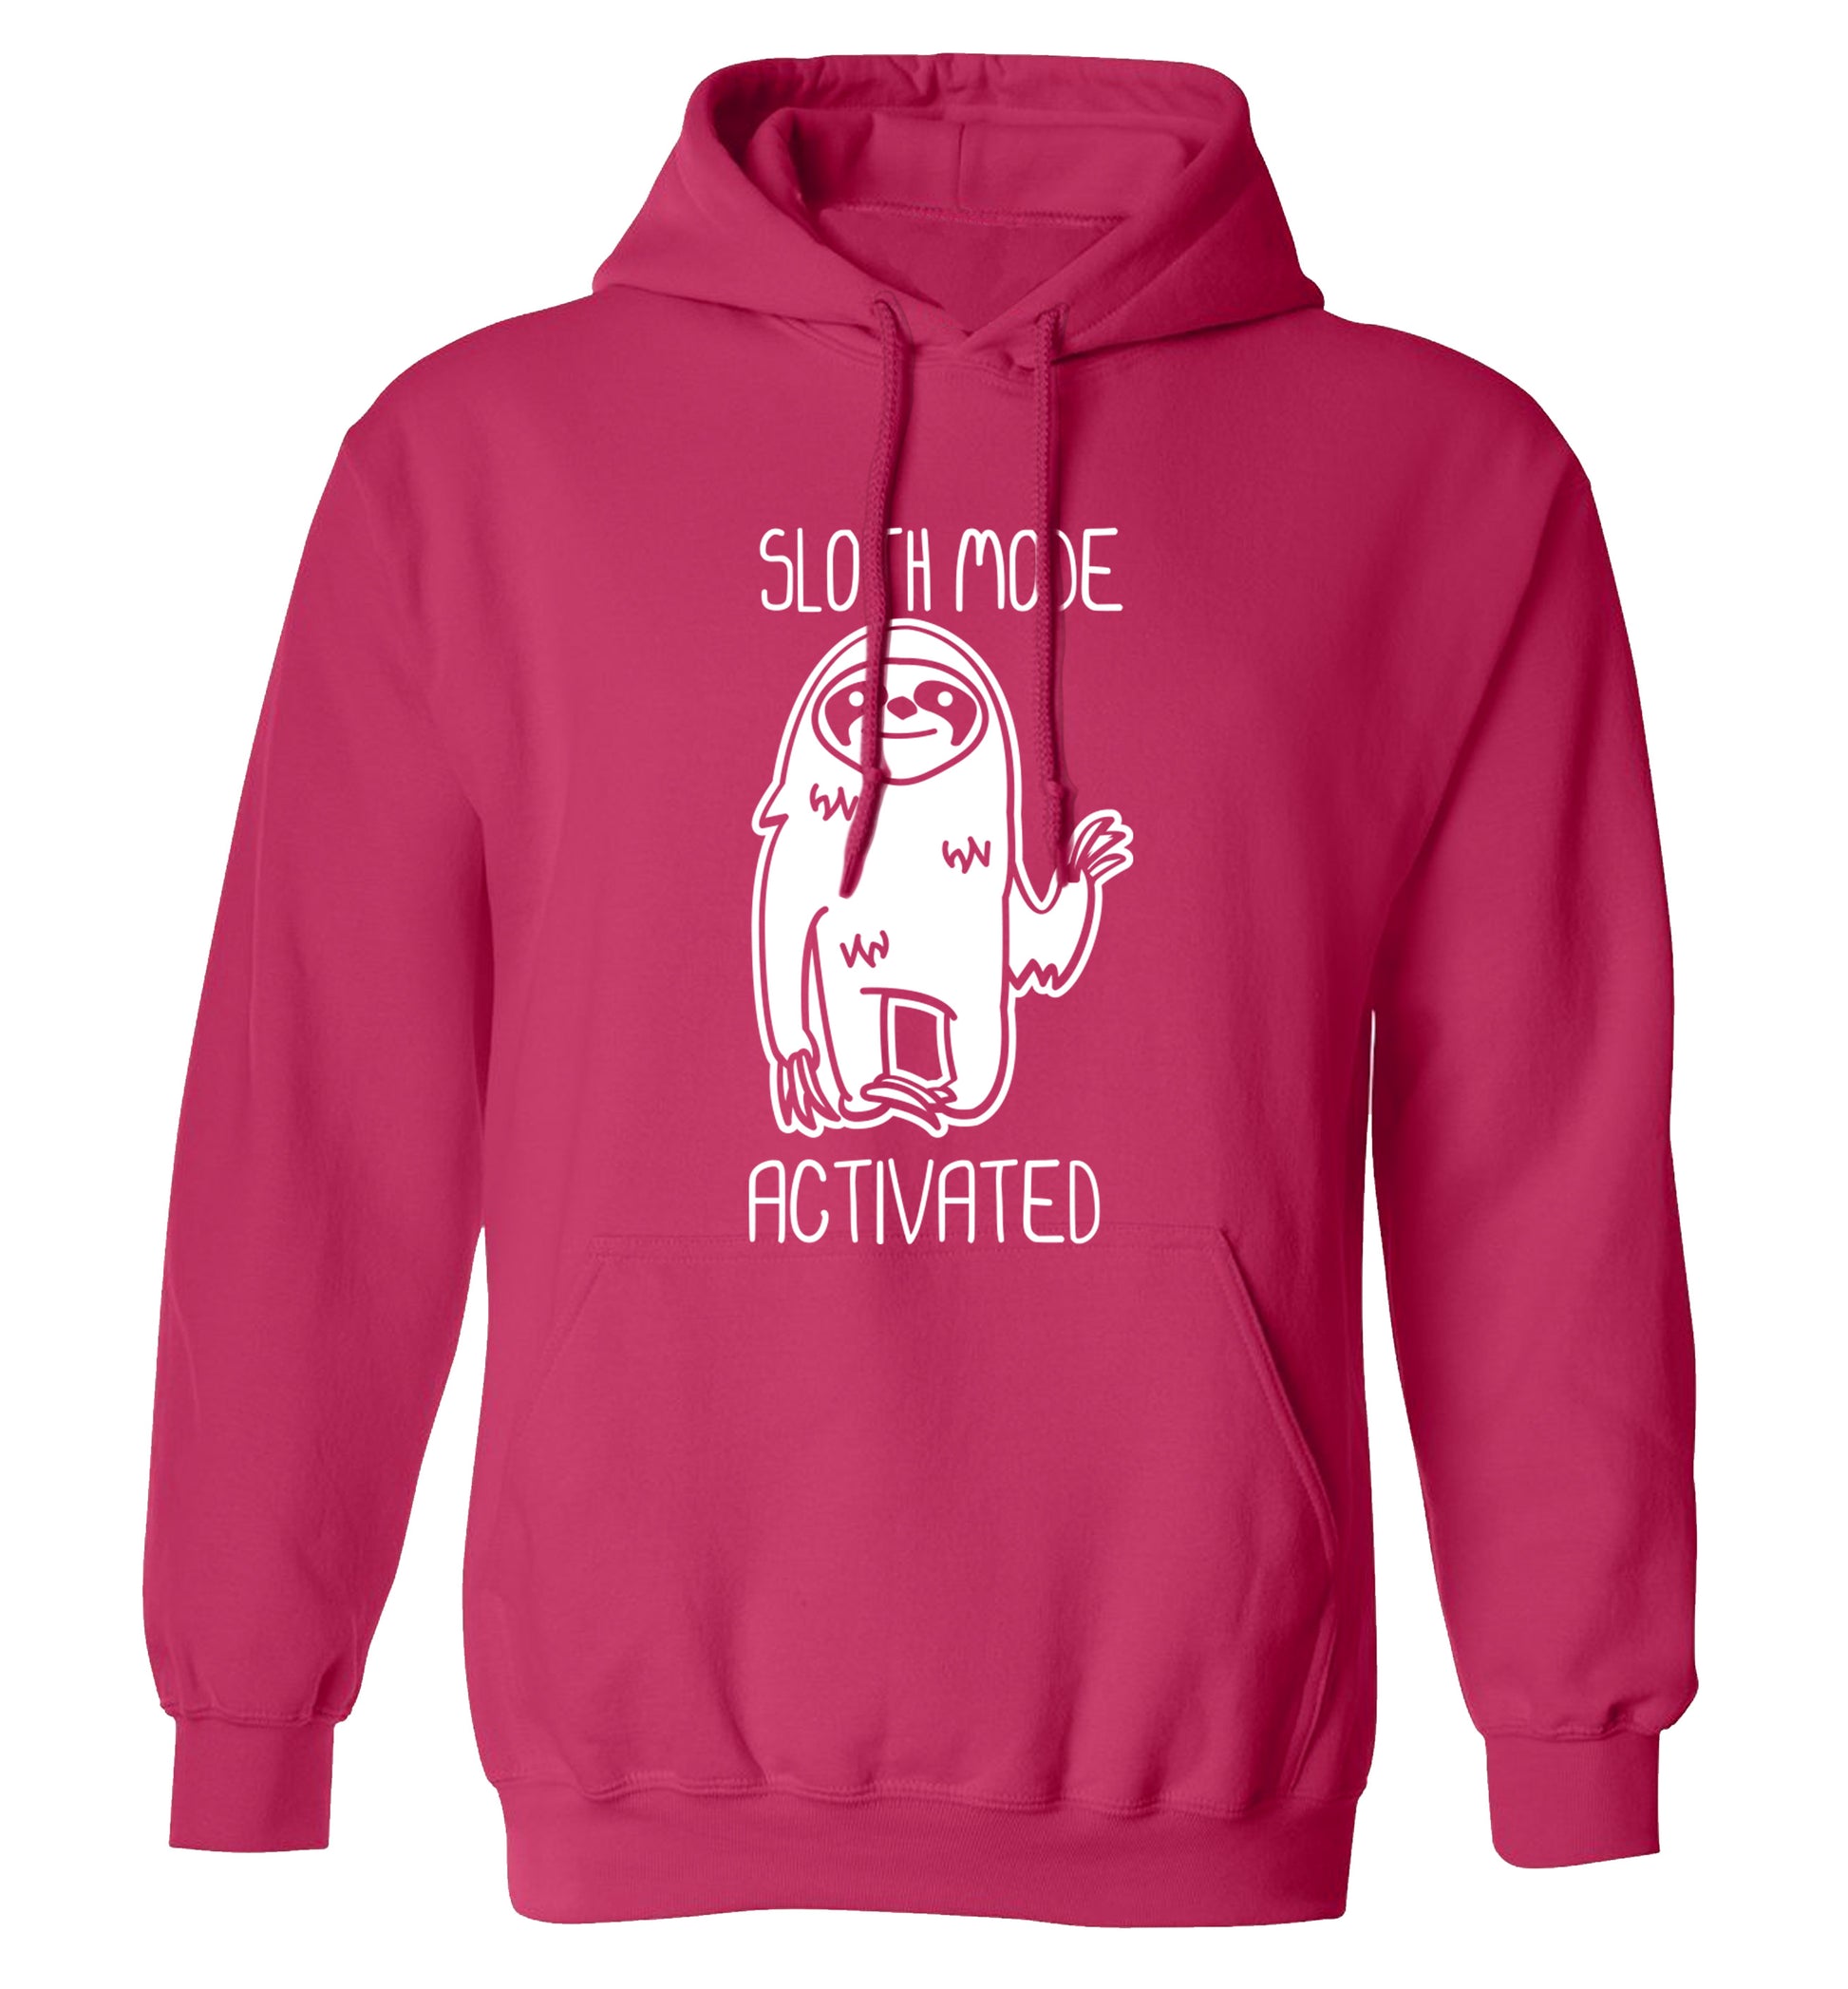 Sloth mode acitvated adults unisex pink hoodie 2XL